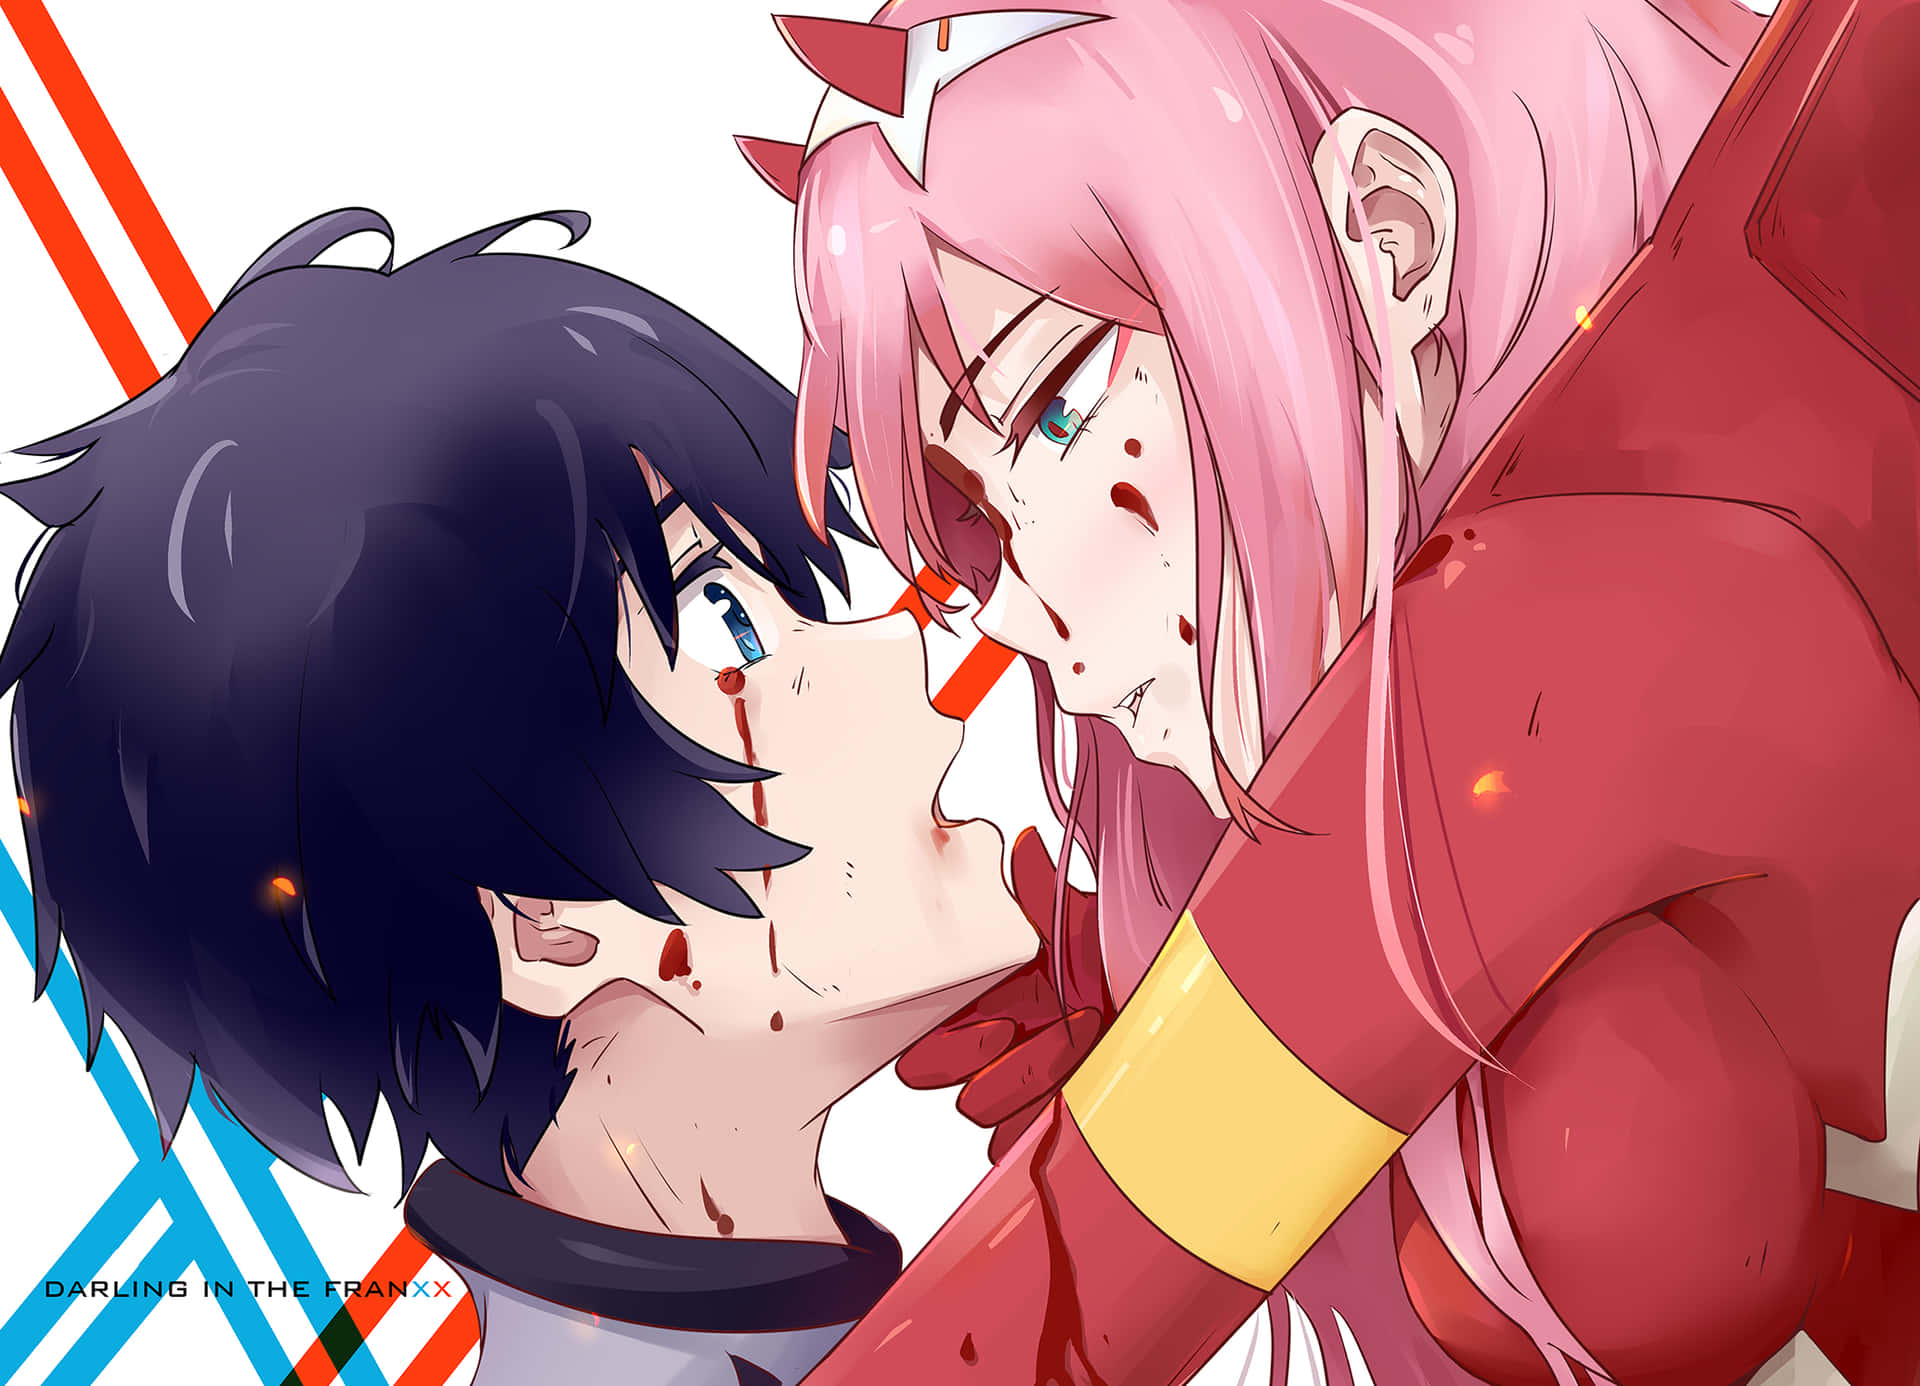 An explosive look inside the battleground of Darling in The Franxx